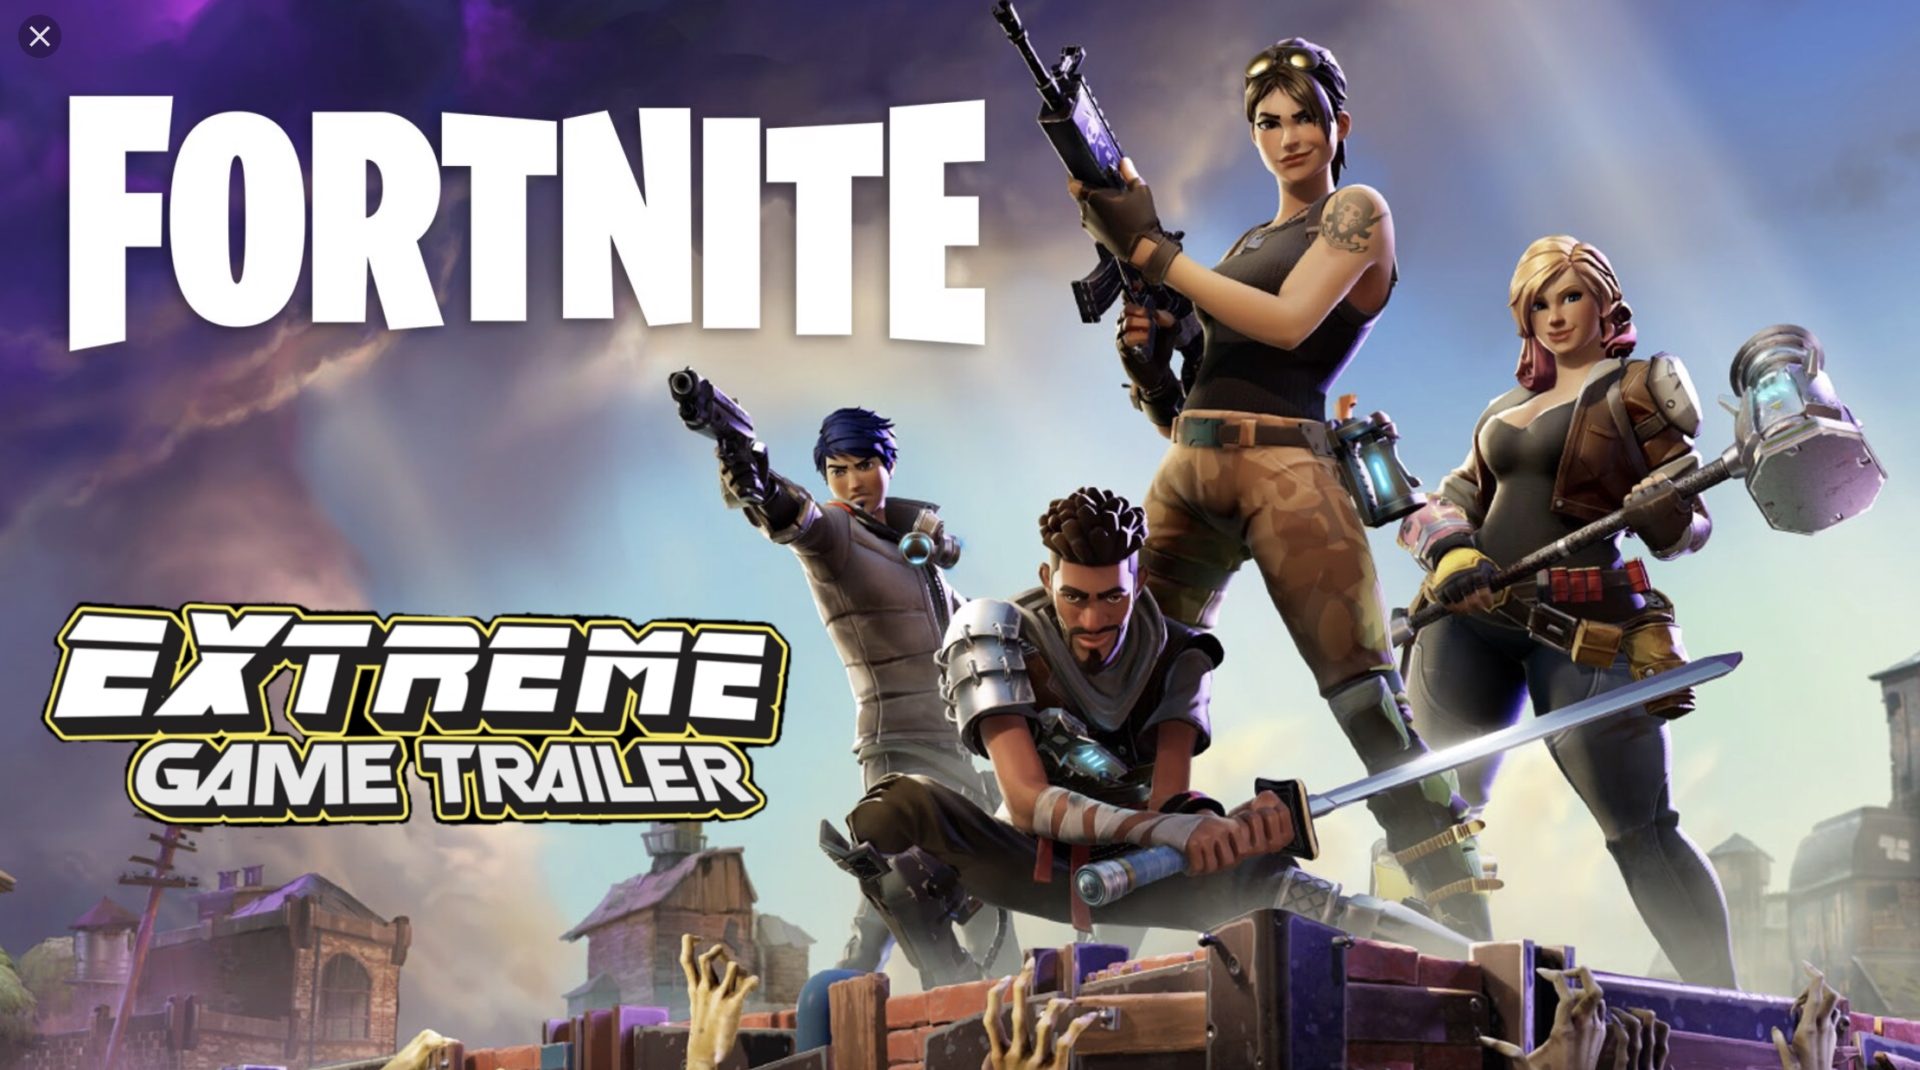 evenwicht krom commentator Fortnite Game Truck Party - Extreme Game Trailer